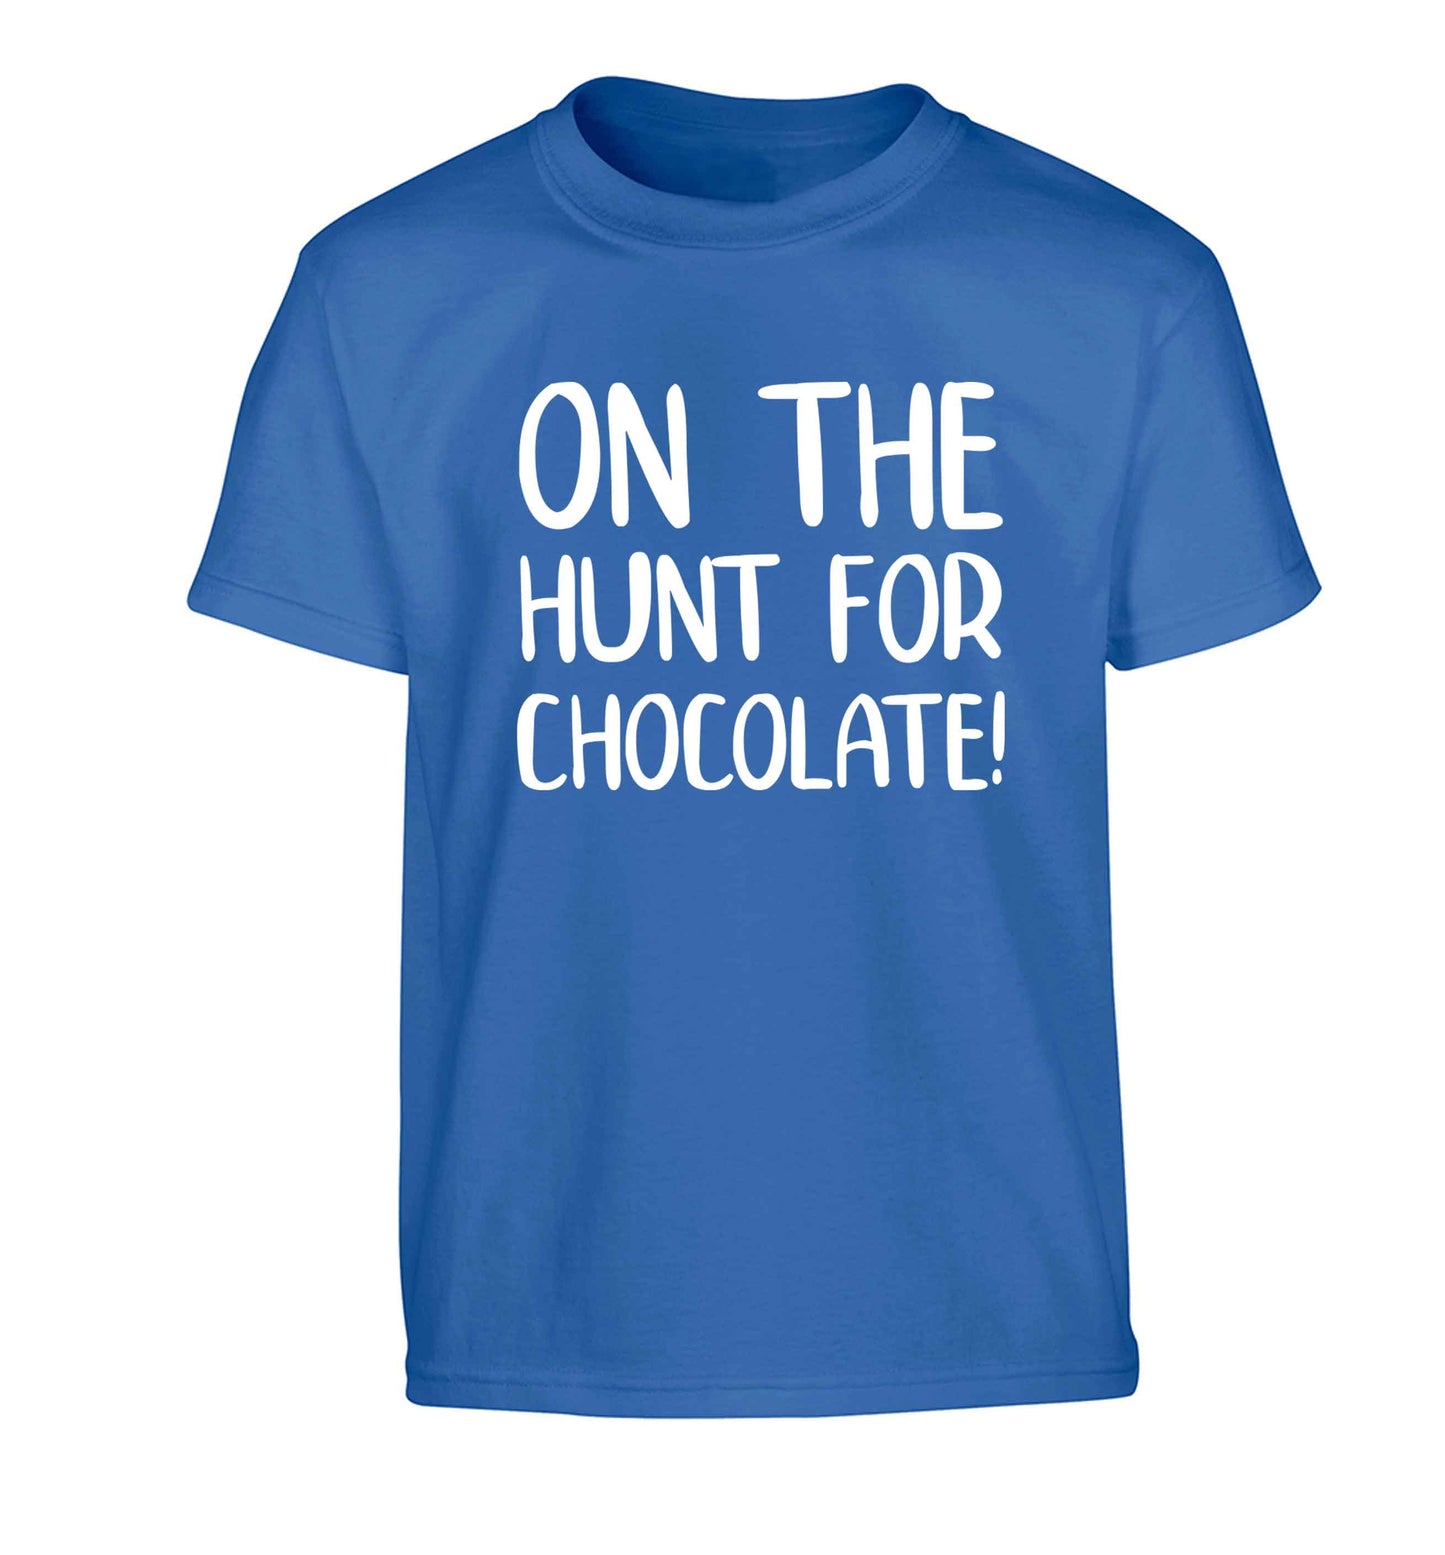 On the hunt for chocolate! Children's blue Tshirt 12-13 Years